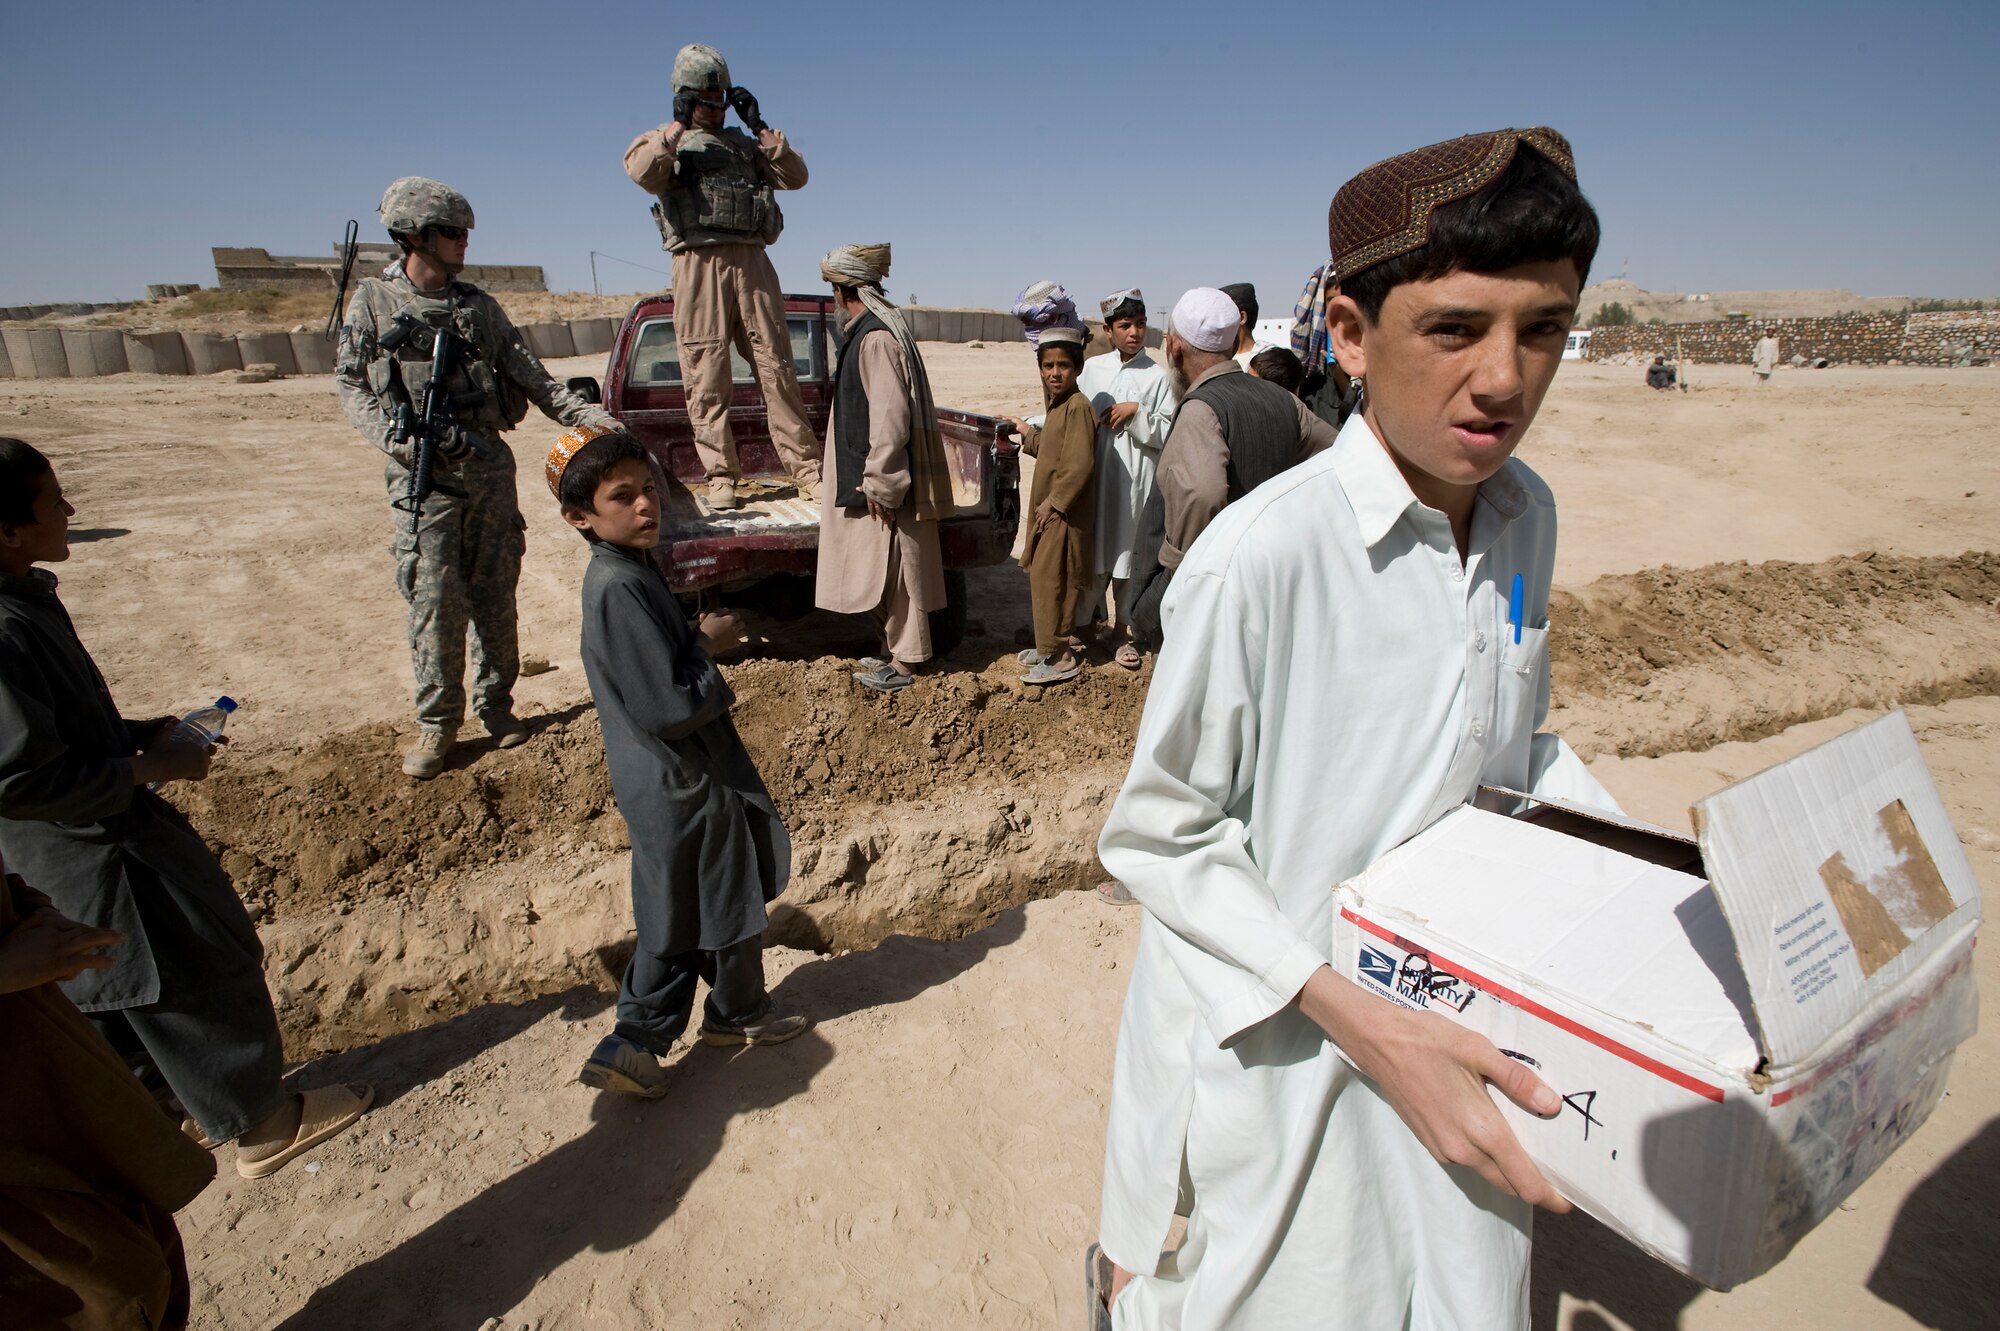 QALAT, Afghanistan – An Afghan child carries a box of school delivered to his school by the Zabul Provincial Reconstruction Team on behalf of the Westfield Community School in Algonquin, Ill. The donated school supplies ranged from pens and crayons to notebooks and glue.  (U.S. Air Force photo by Master Sgt. Keith Brown)